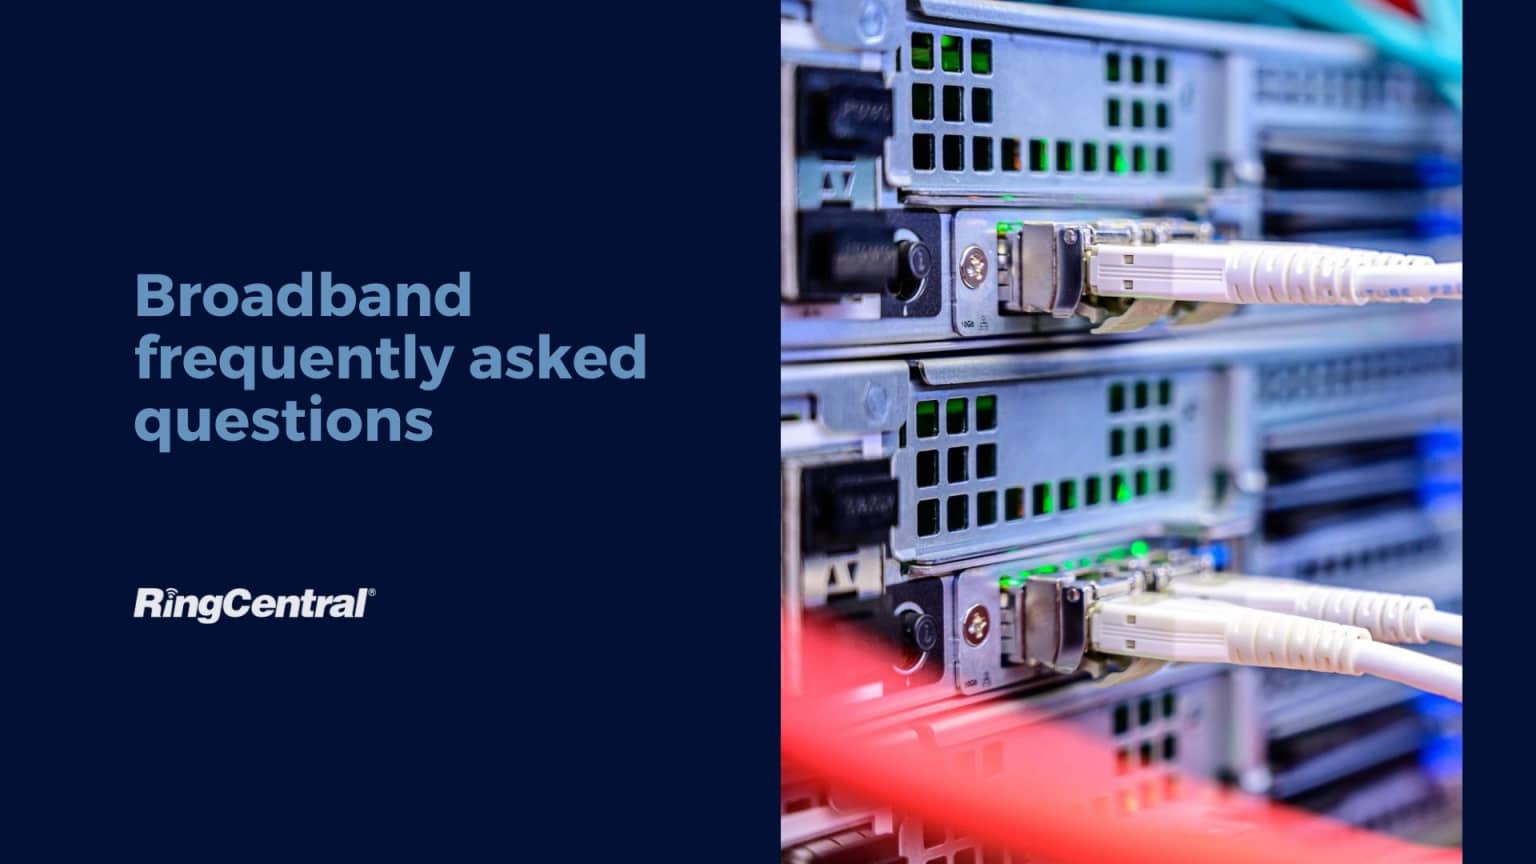 Broadband frequently asked questions